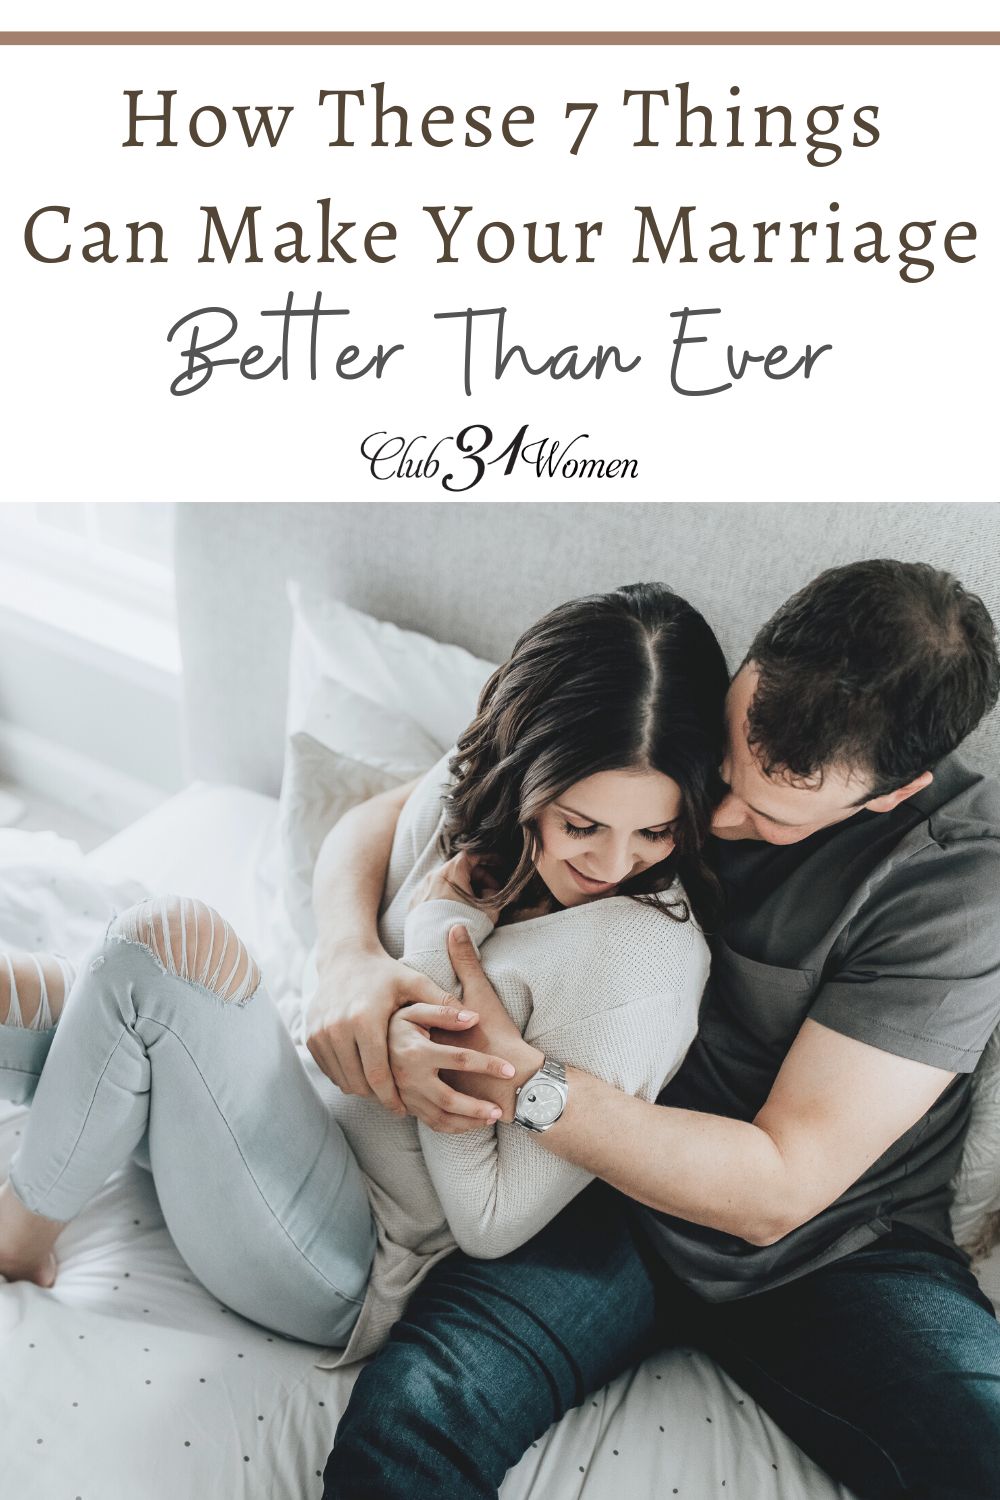 Does your marriage feel a little stale? What if there were some things you could do to make your marriage better than ever? via @Club31Women